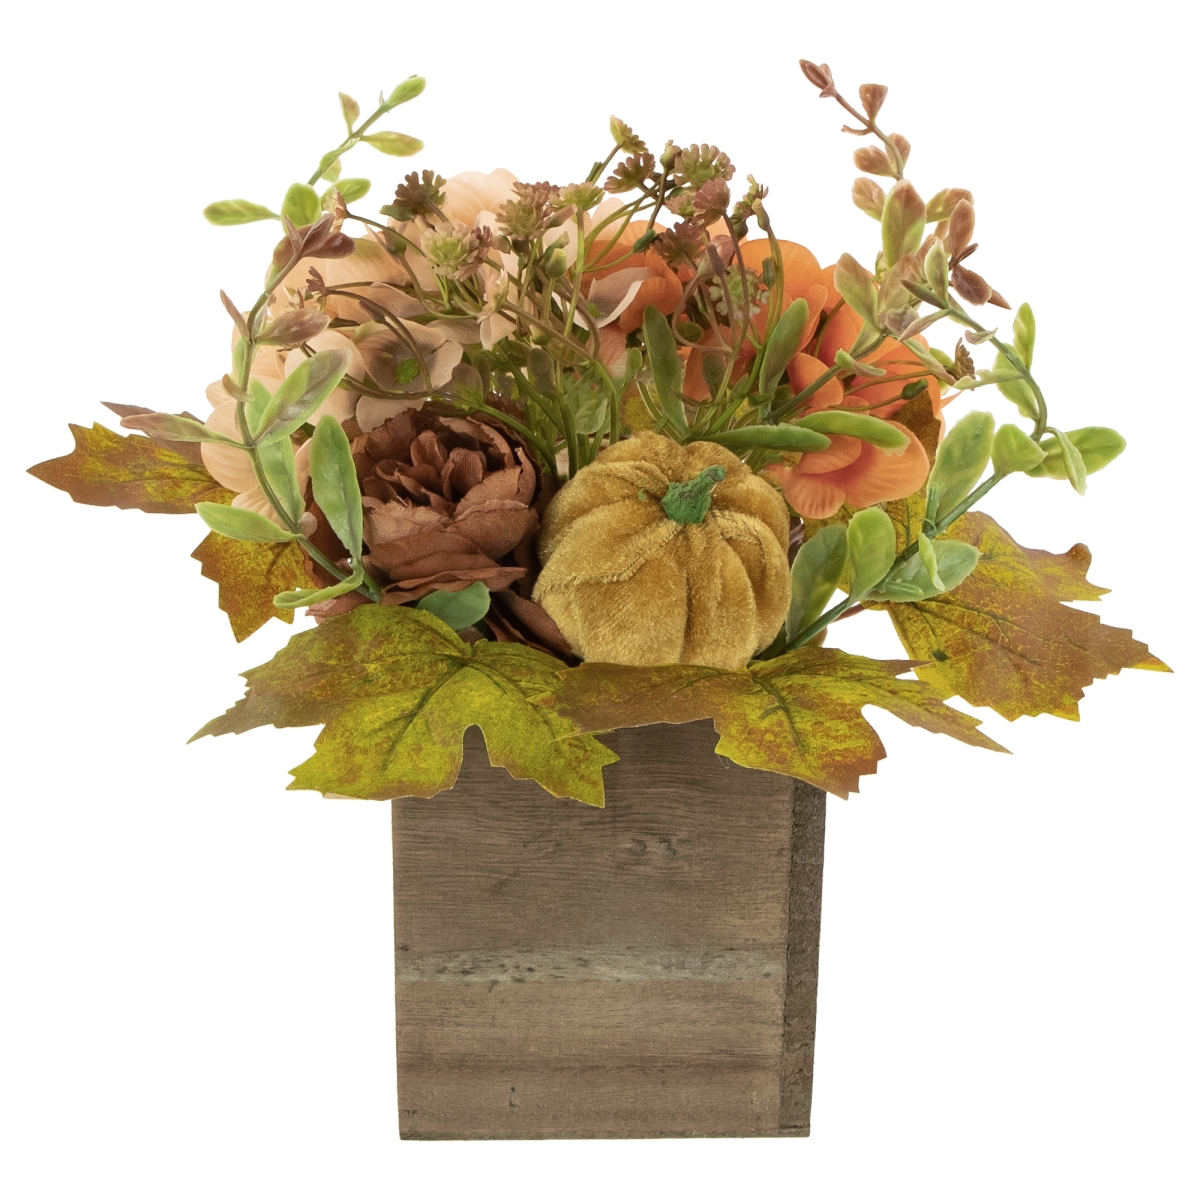 Picture of Northlight 35182616 10 x 8 in. Orange Floral & Pumpkin Wooden Box Fall Harvest Tabletop Decoration